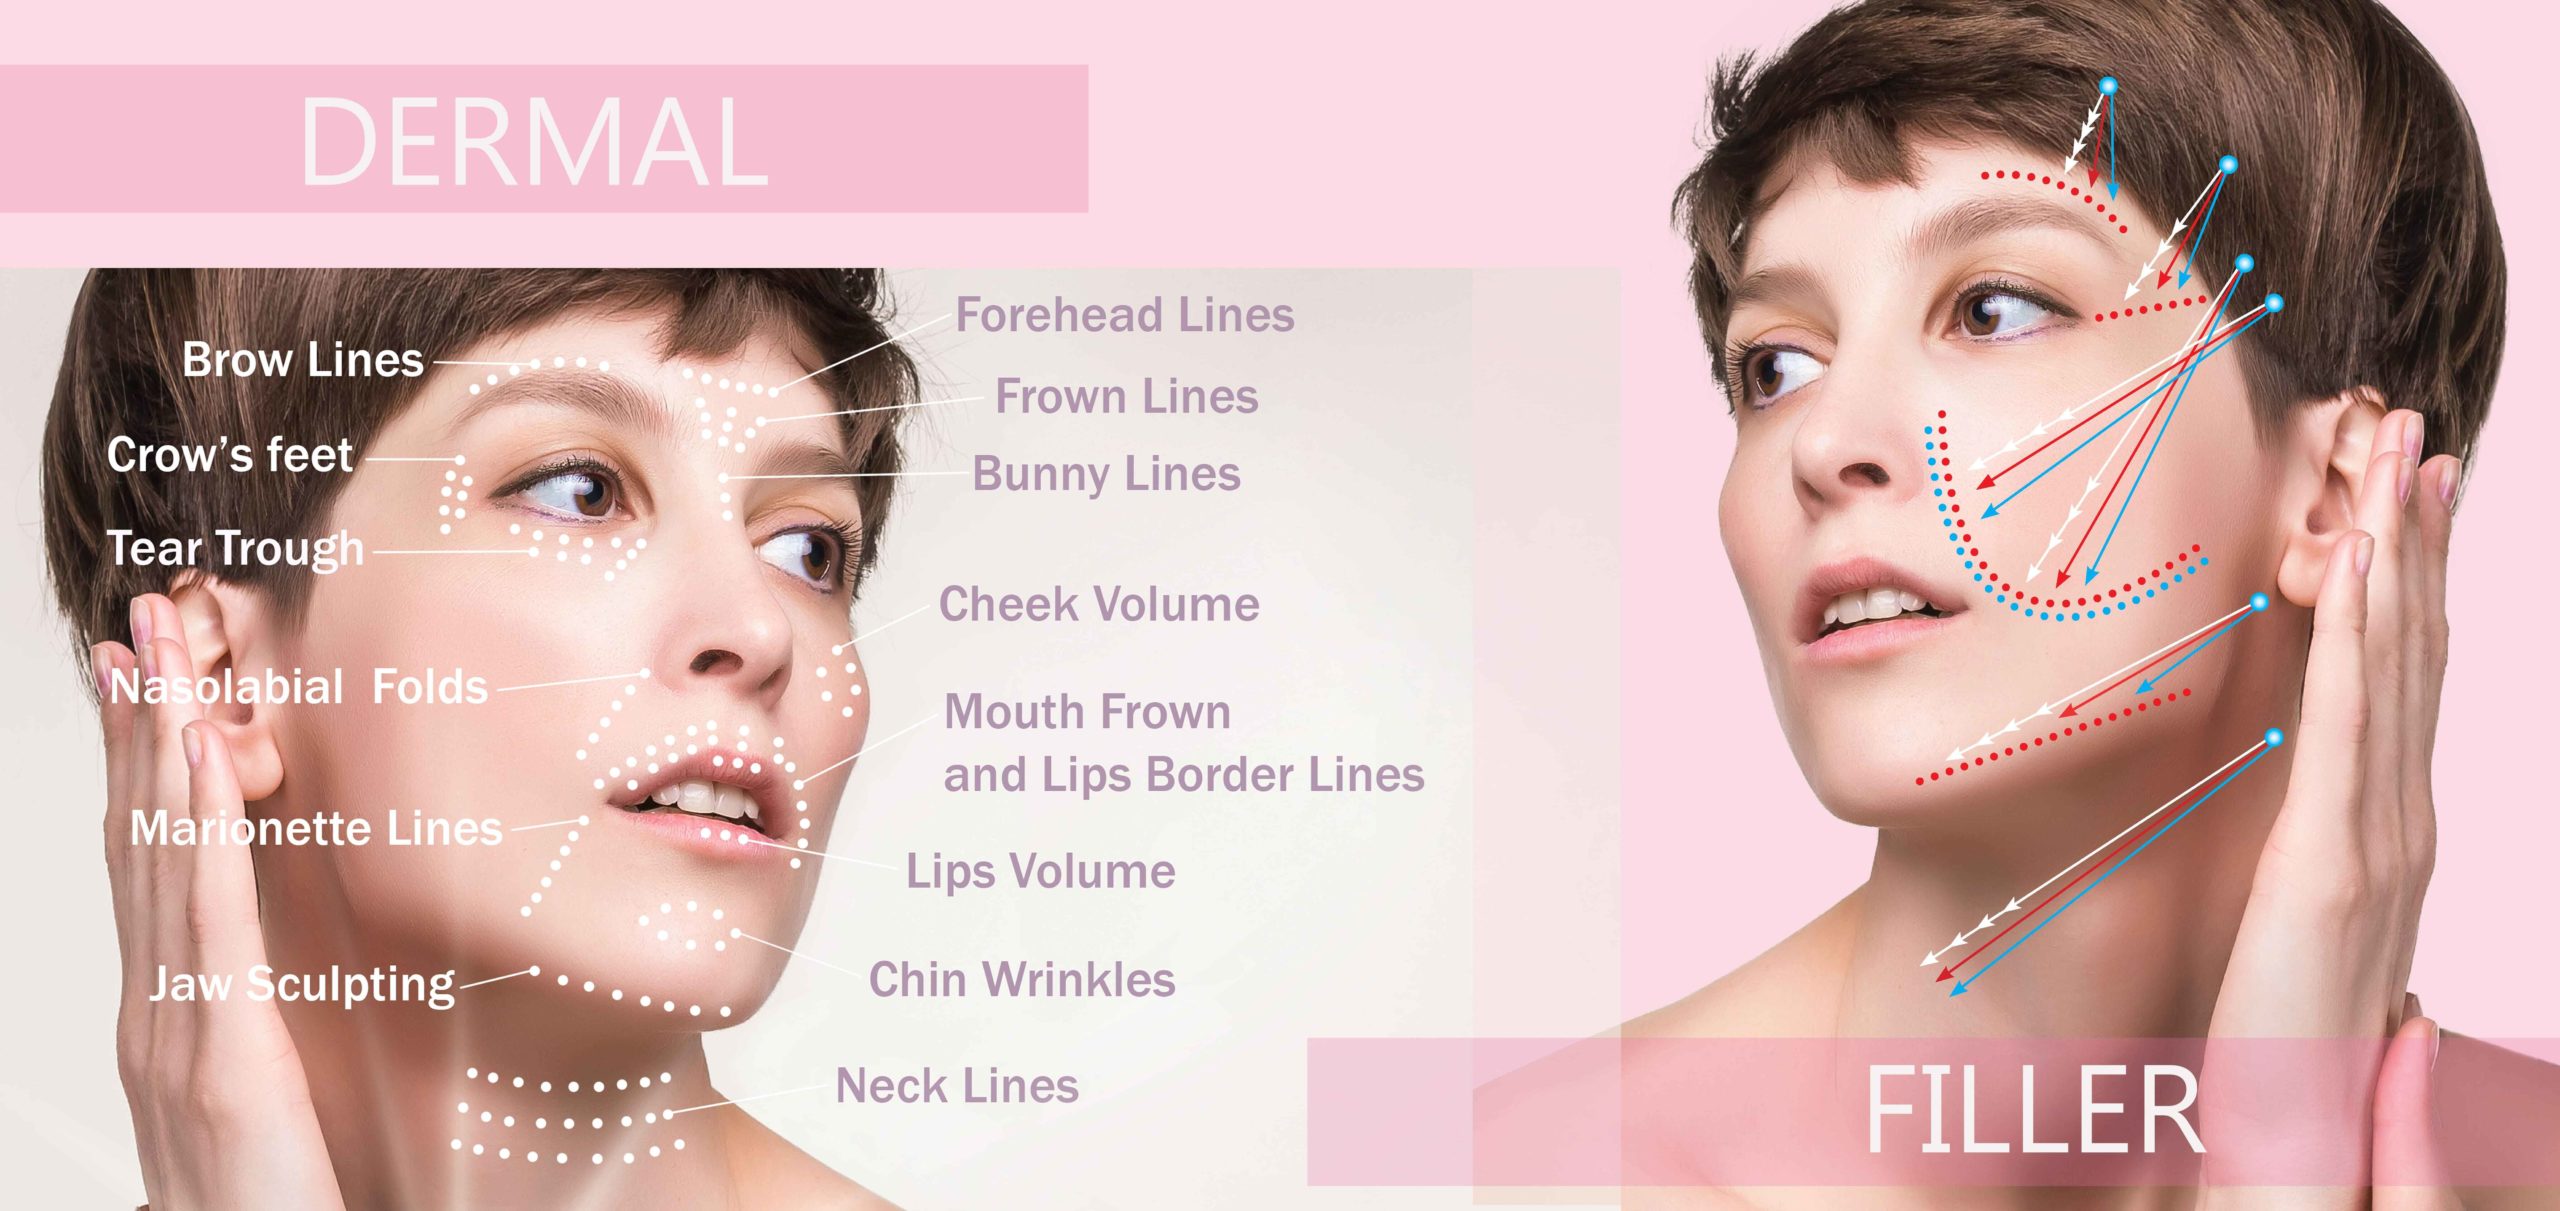 Dermal-fillers-By-R-And-R-Aesthetic-Medicine-in-Kent-WA